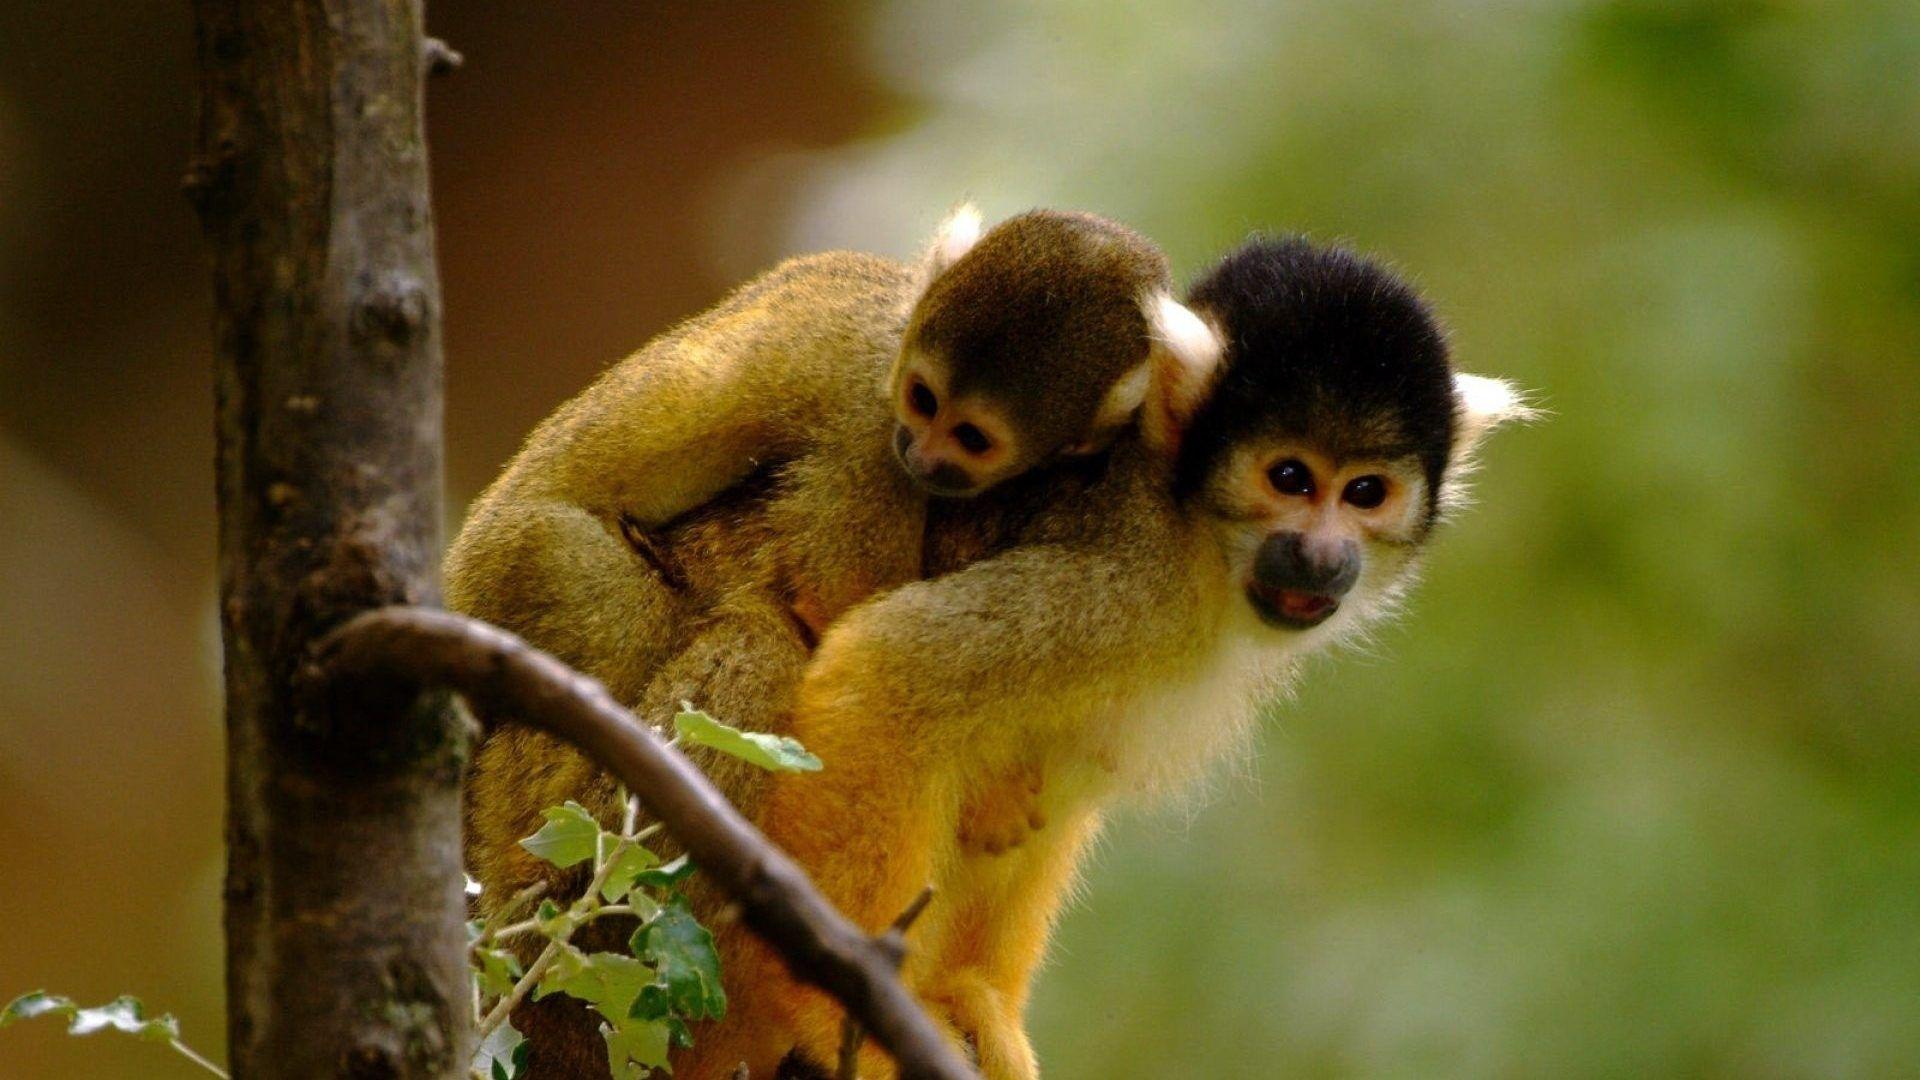 Monkey Tag wallpaper: Monkey Baby Animal Picture With